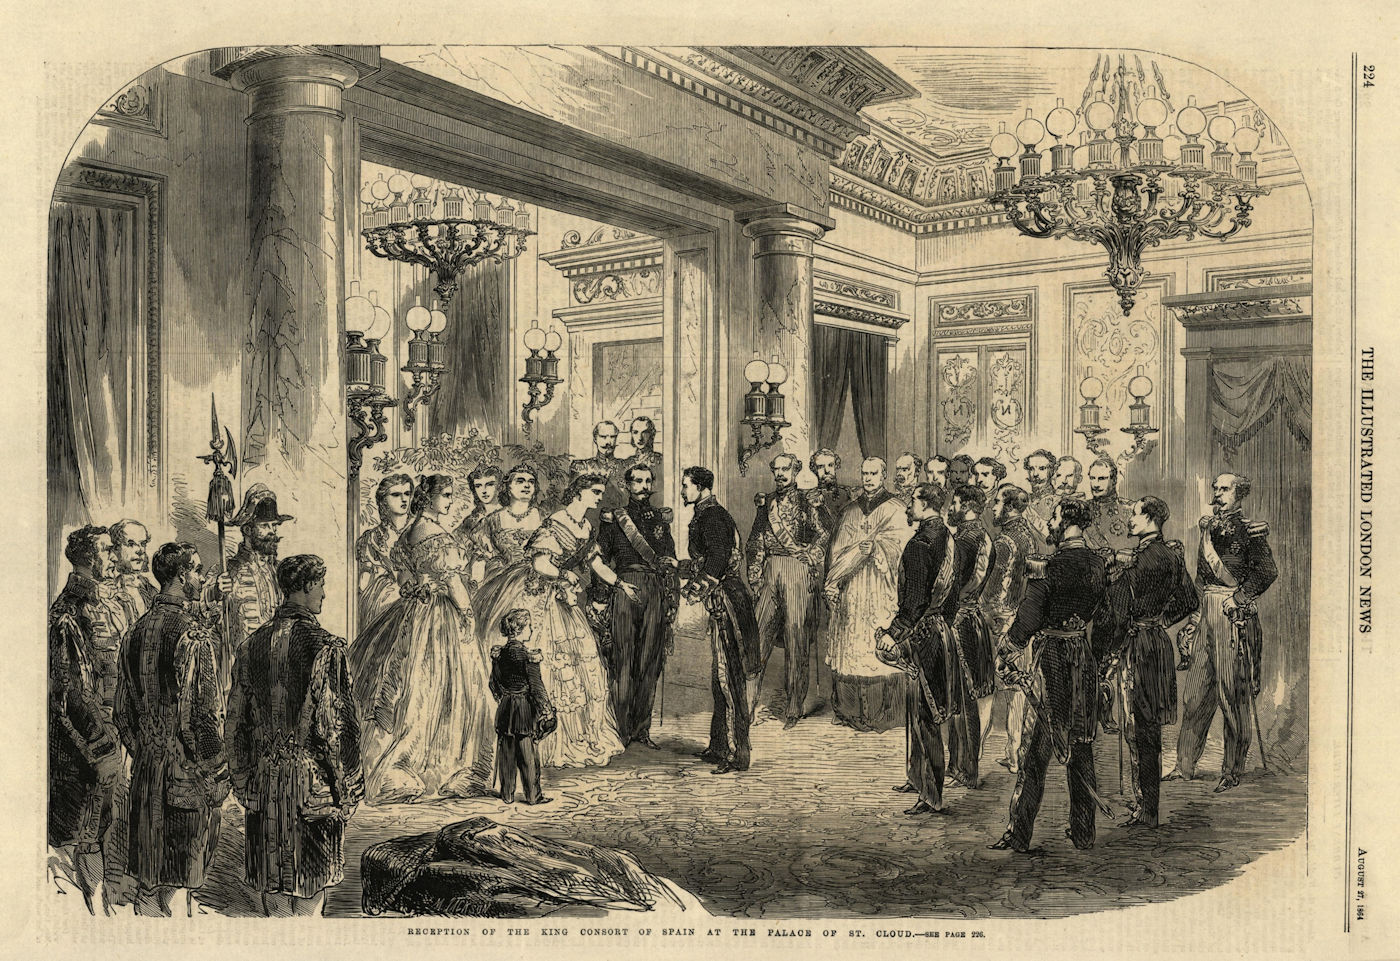 Reception of the King Consort of Spain at the Palace of St. Cloud. Paris 1864